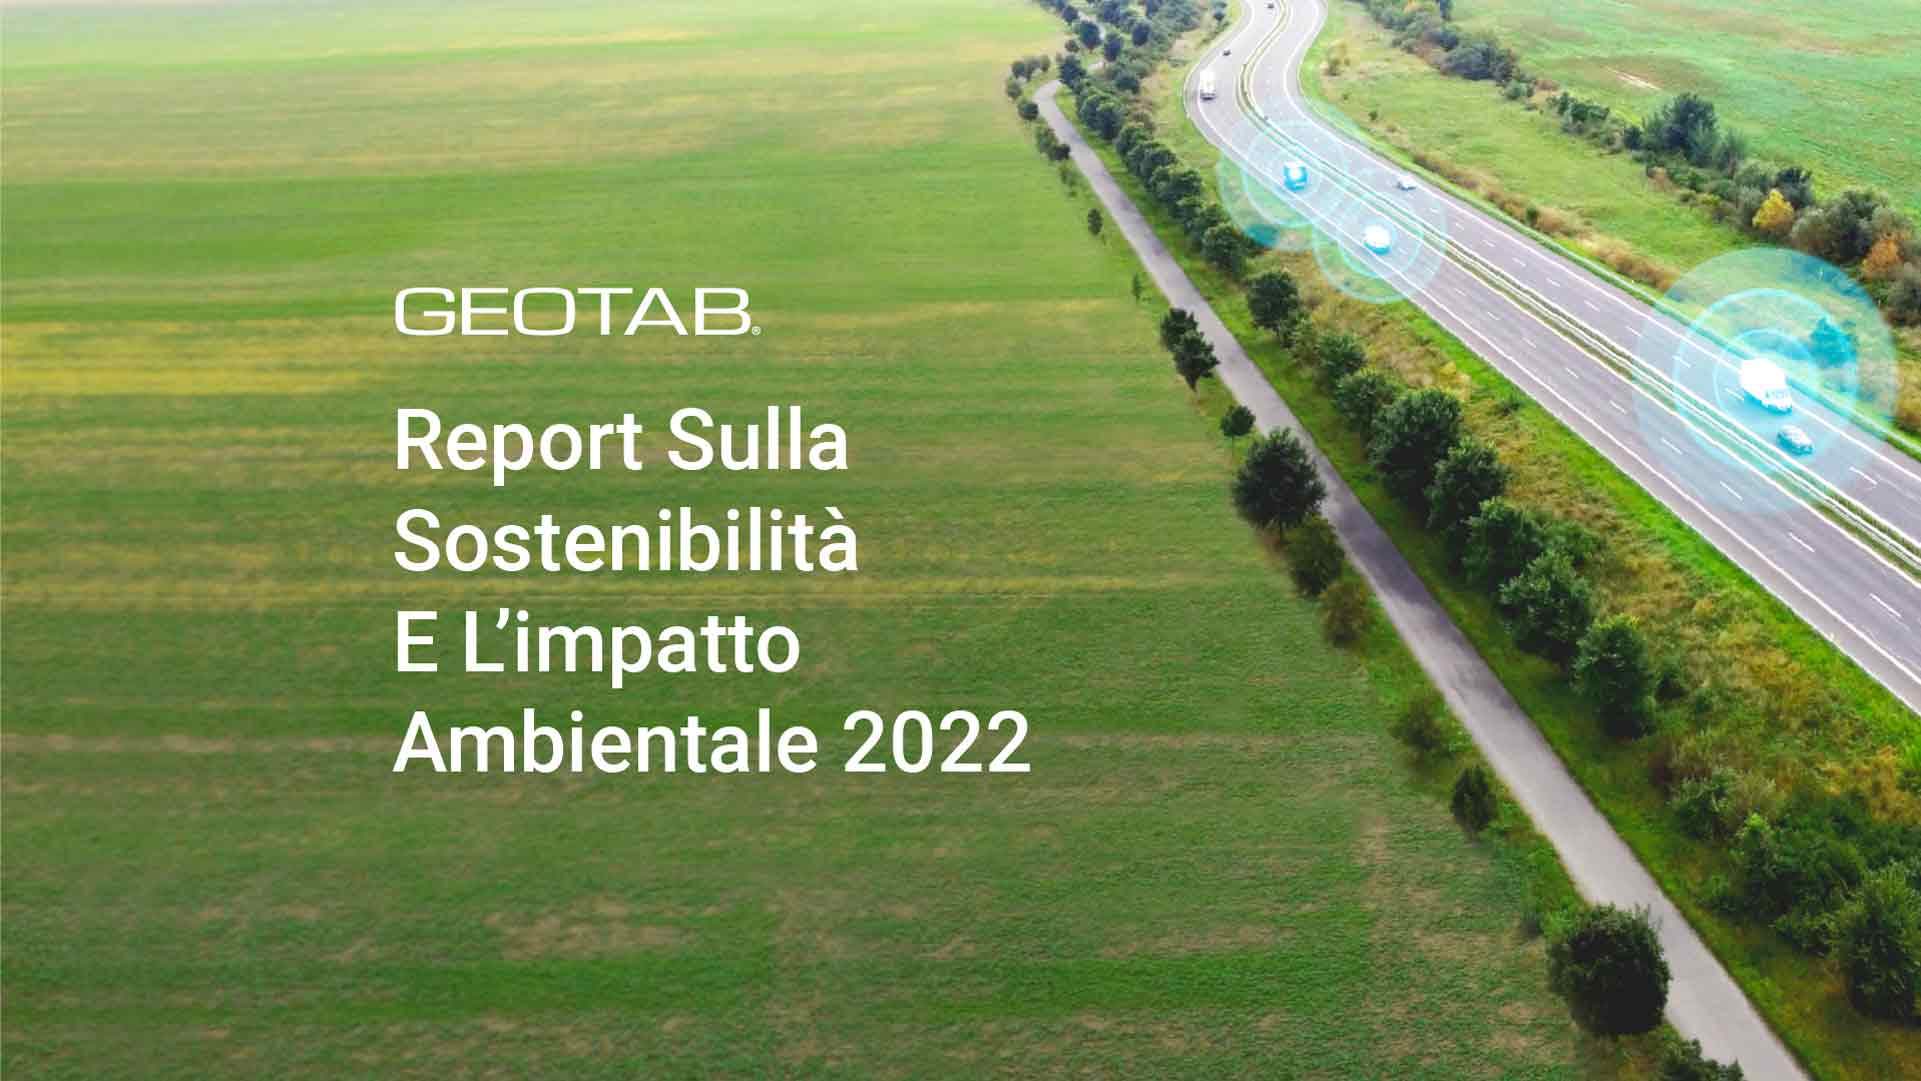 card image for 2022 sustainability report